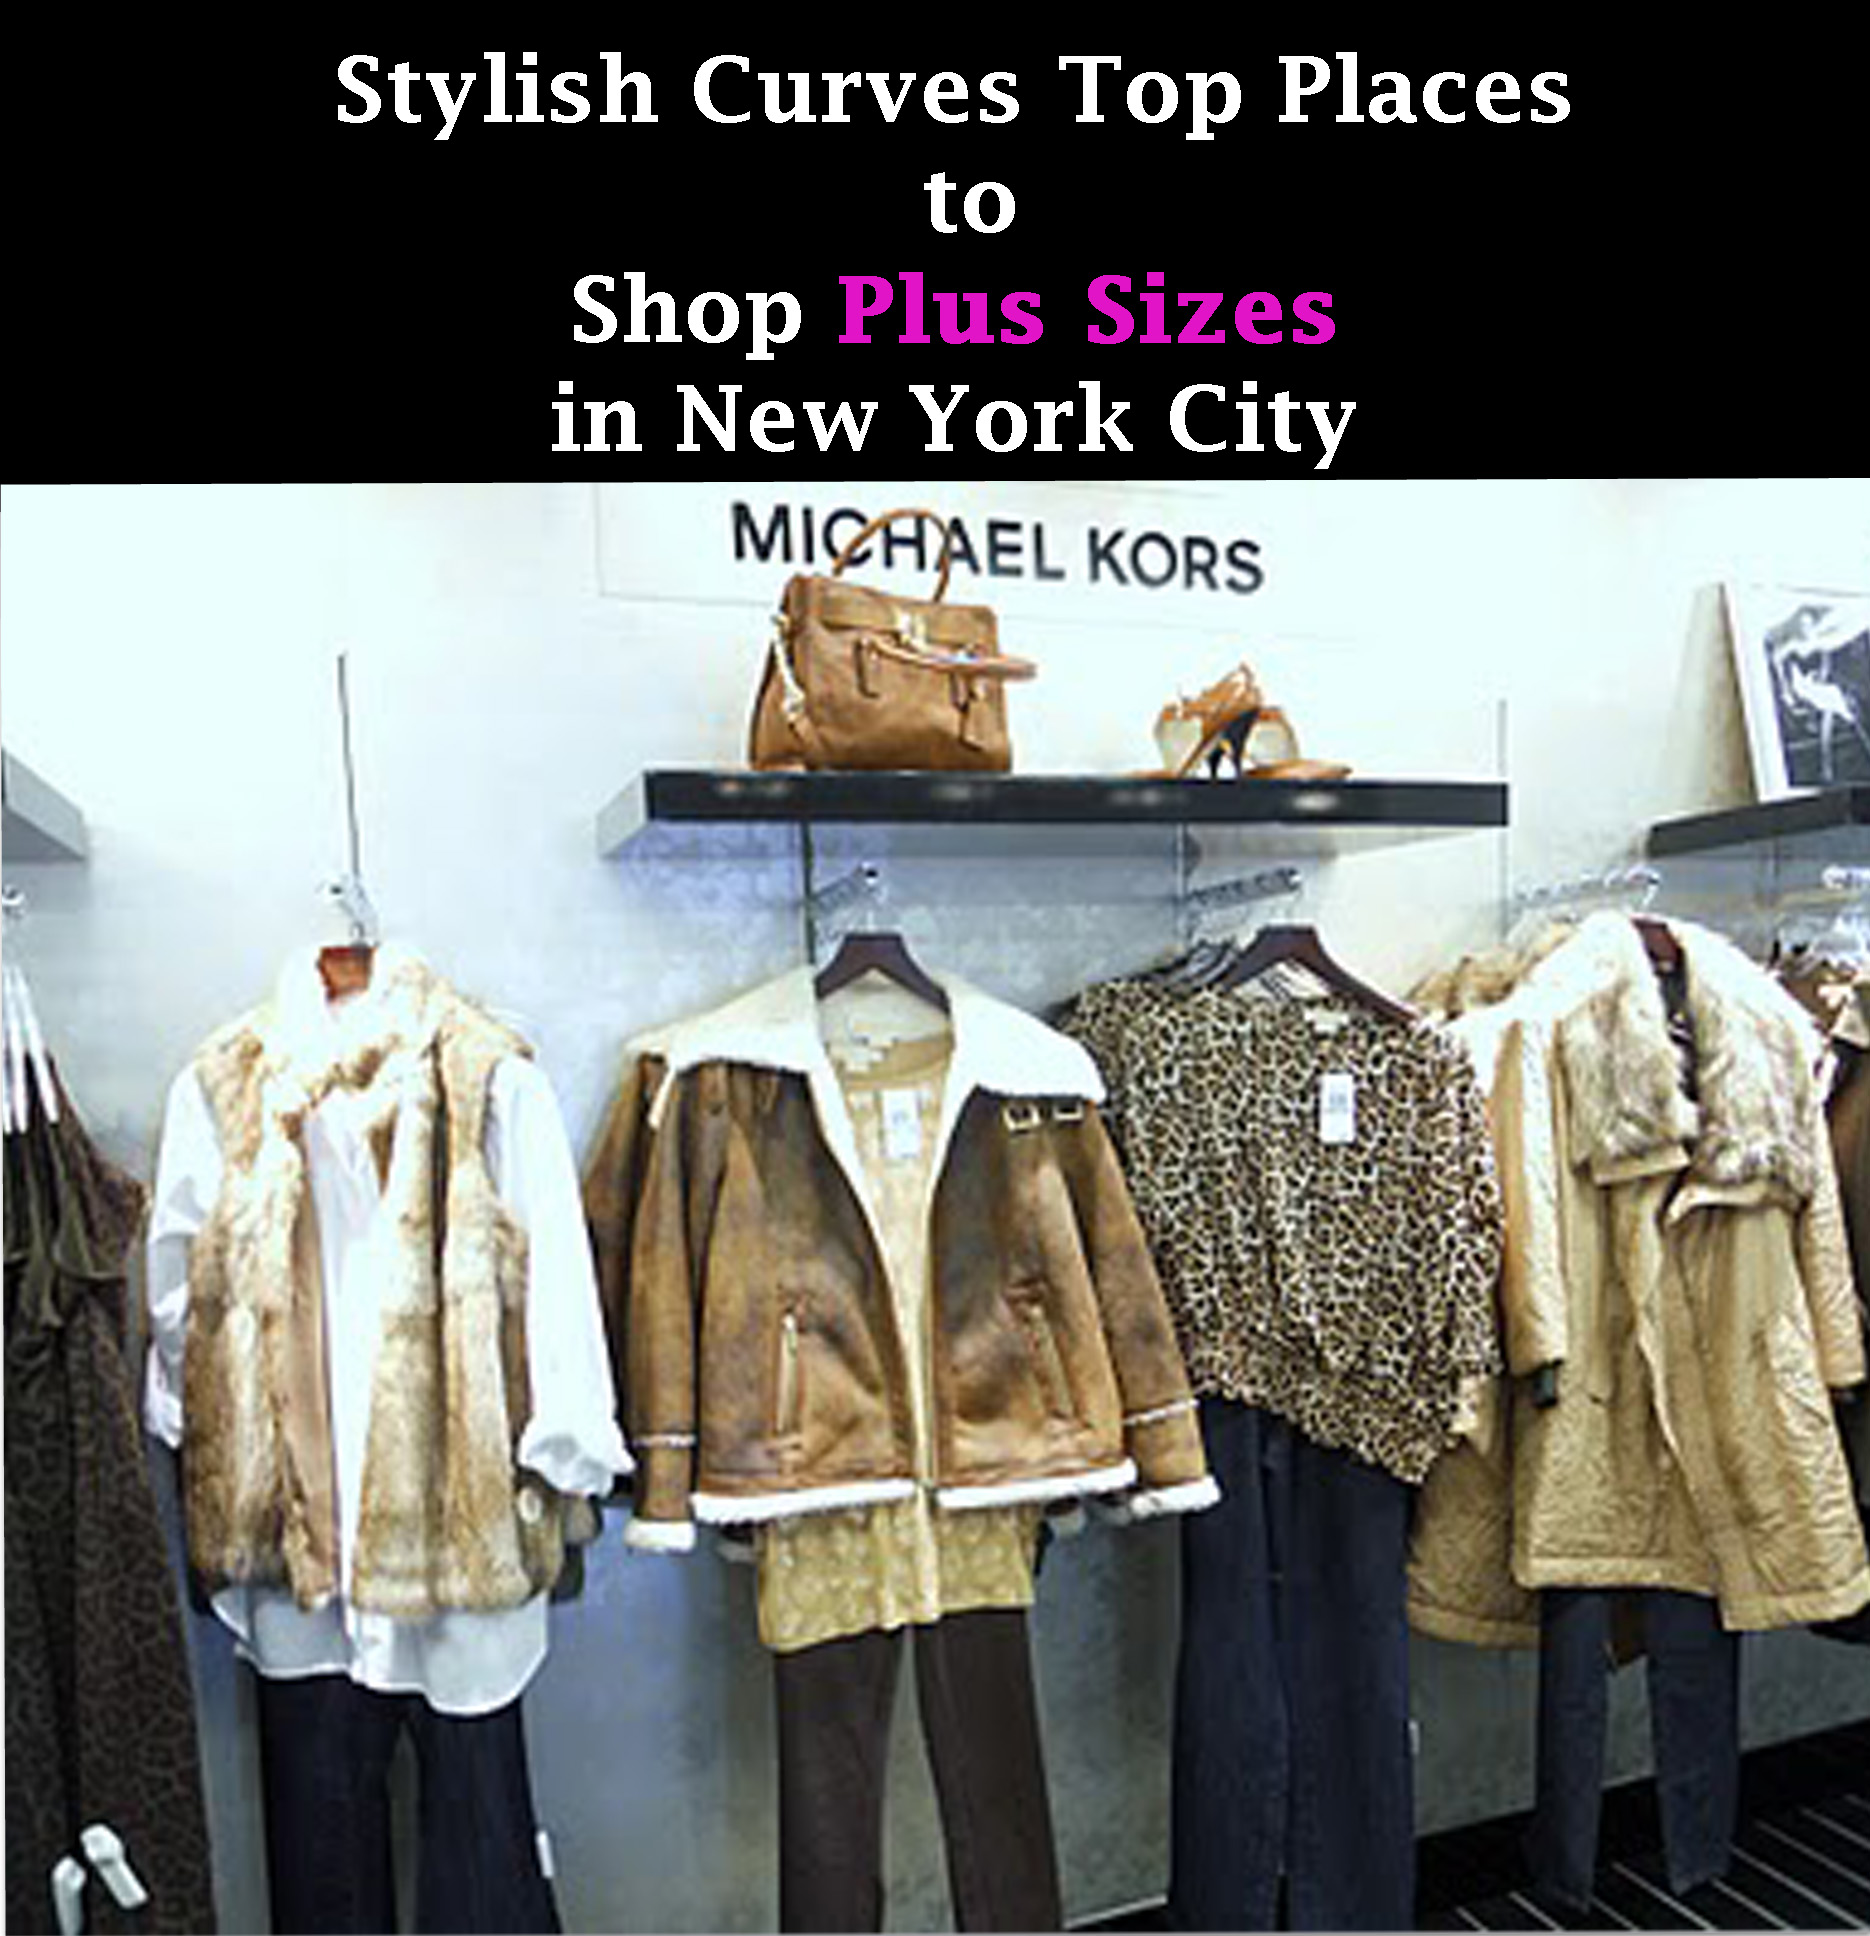 SIZE SHOPPING: ALISSA'S TOP 11 PLACES SHOP FOR PLUS SIZE CLOTHES IN NYC - Stylish Curves